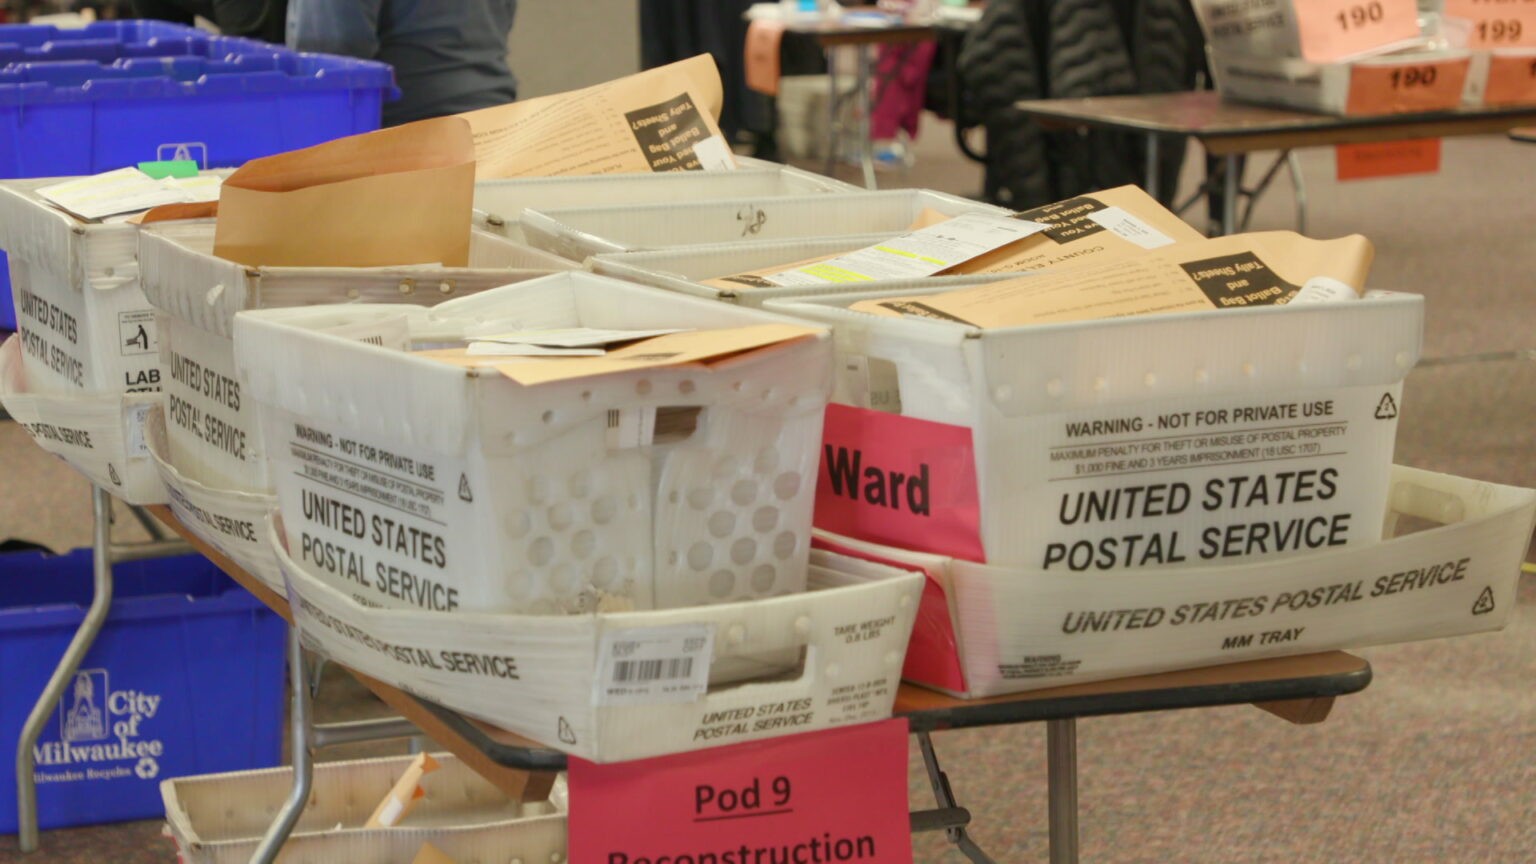 United States Postal Service boxes filled with absentee ballots sit on a table in a room.